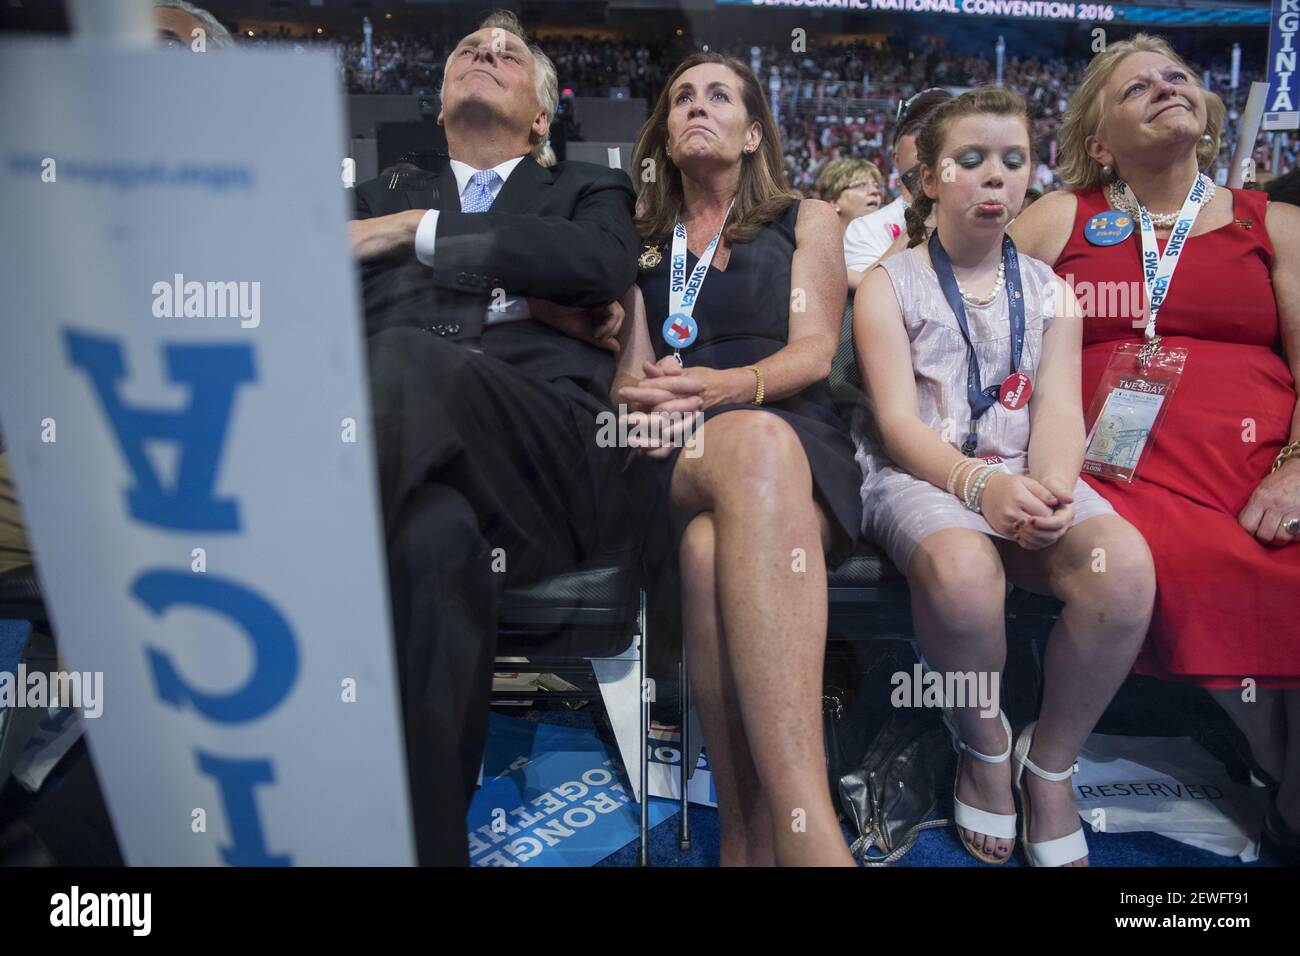 UNITED STATES - JULY 26: From left, Virginia Gov. Terry McAuliffe, his wife Dorothy, and Fiona Rodham, 9, niece of Hillary Clinton, appear on the floor of the Wells Fargo Center in Philadelphia, Pa., on the second day of the Democratic National Convention, July 26, 2016.  Stock Photo